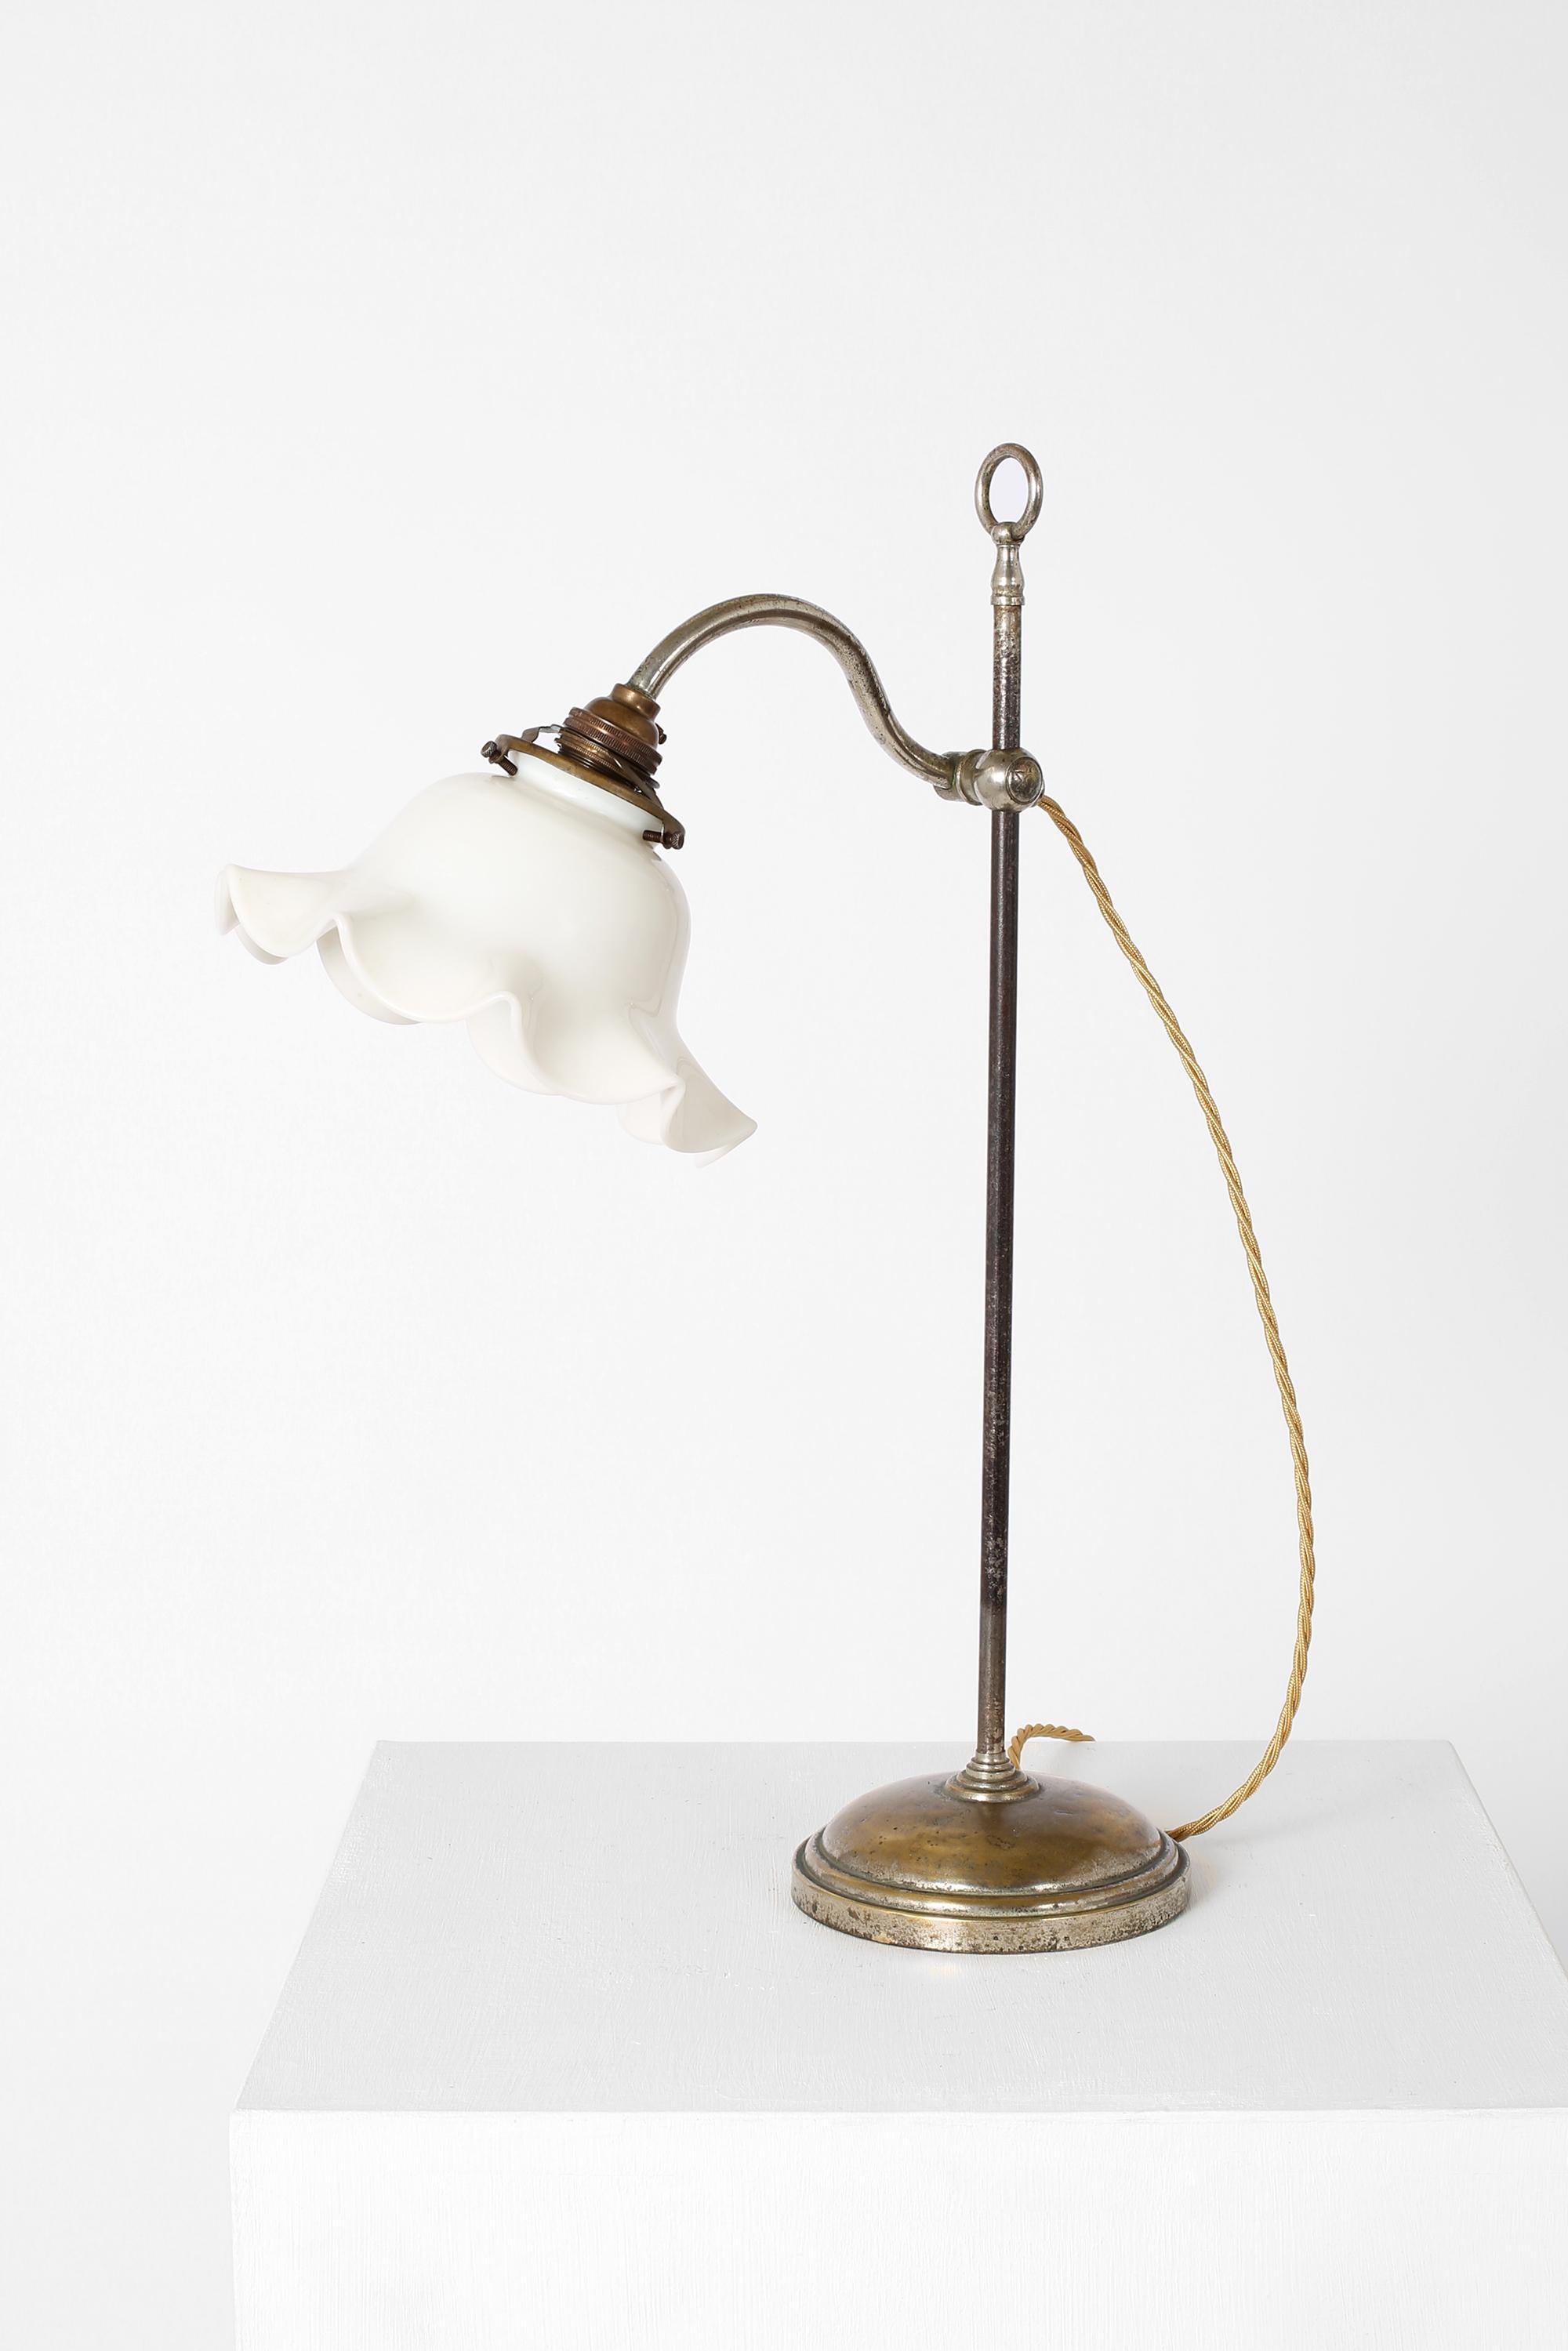 A nickel plated steel and bronze Art Nouveau desk/table lamp, with ruffled milk glass shade on a counterweight arm. French, c. 1900.